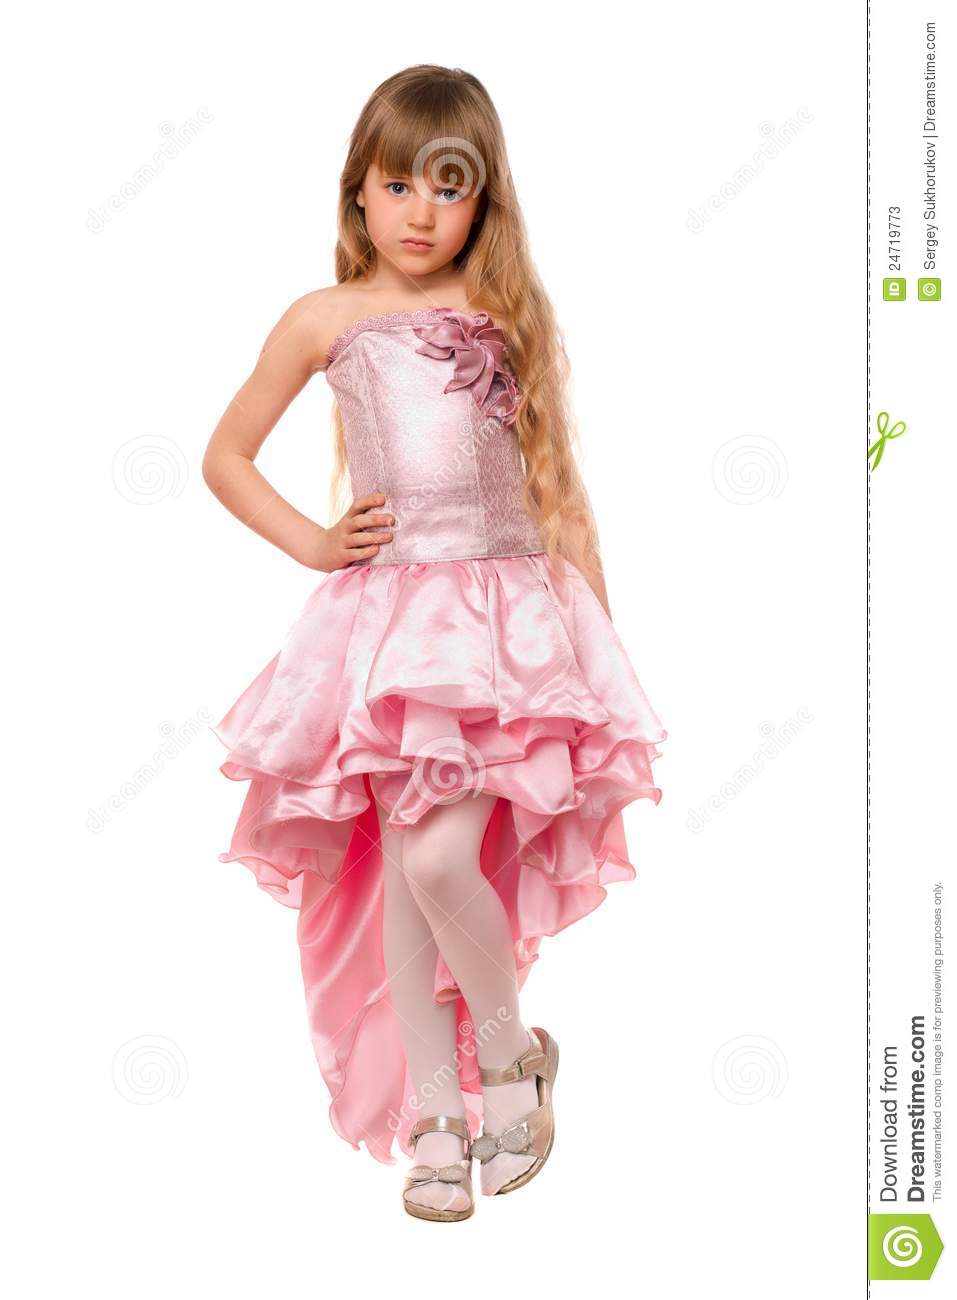 Boy In Pink Dress & How To Look Good 2017-2018